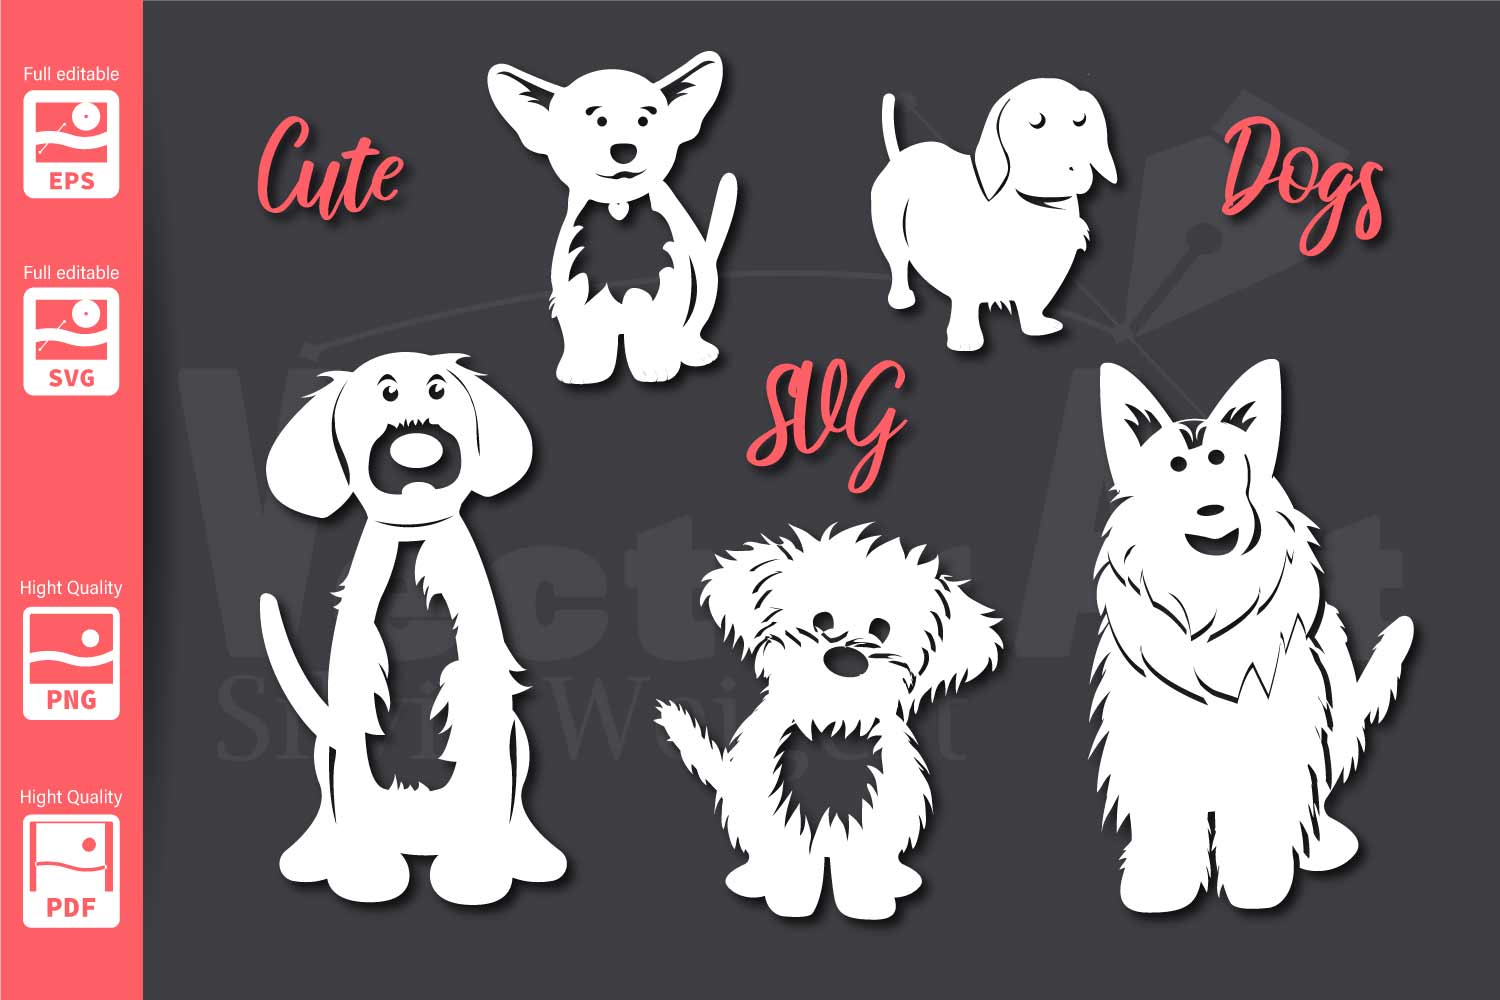 Download 5 Cute Dogs - SVG - Cut Files for Beginners (190019) | Cut ...